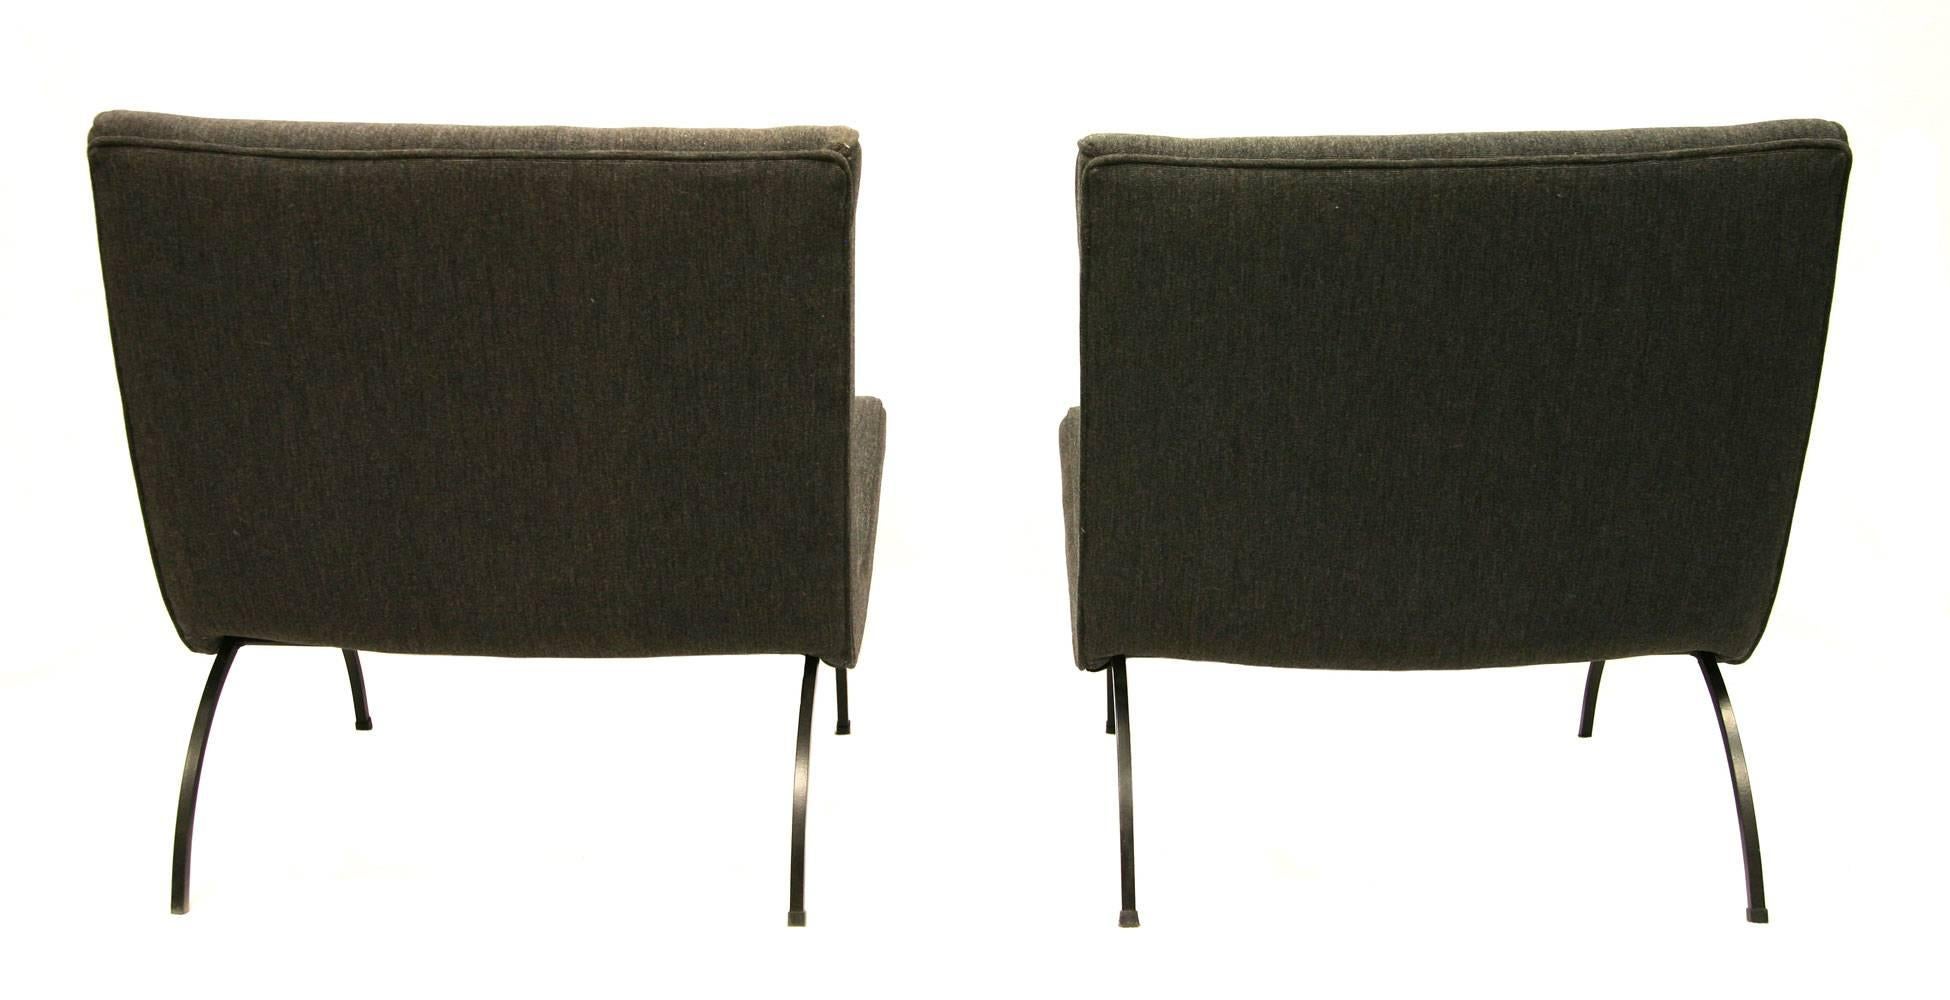 Pair of Milo Baughman Scoop Chairs In Excellent Condition For Sale In Tucson, AZ